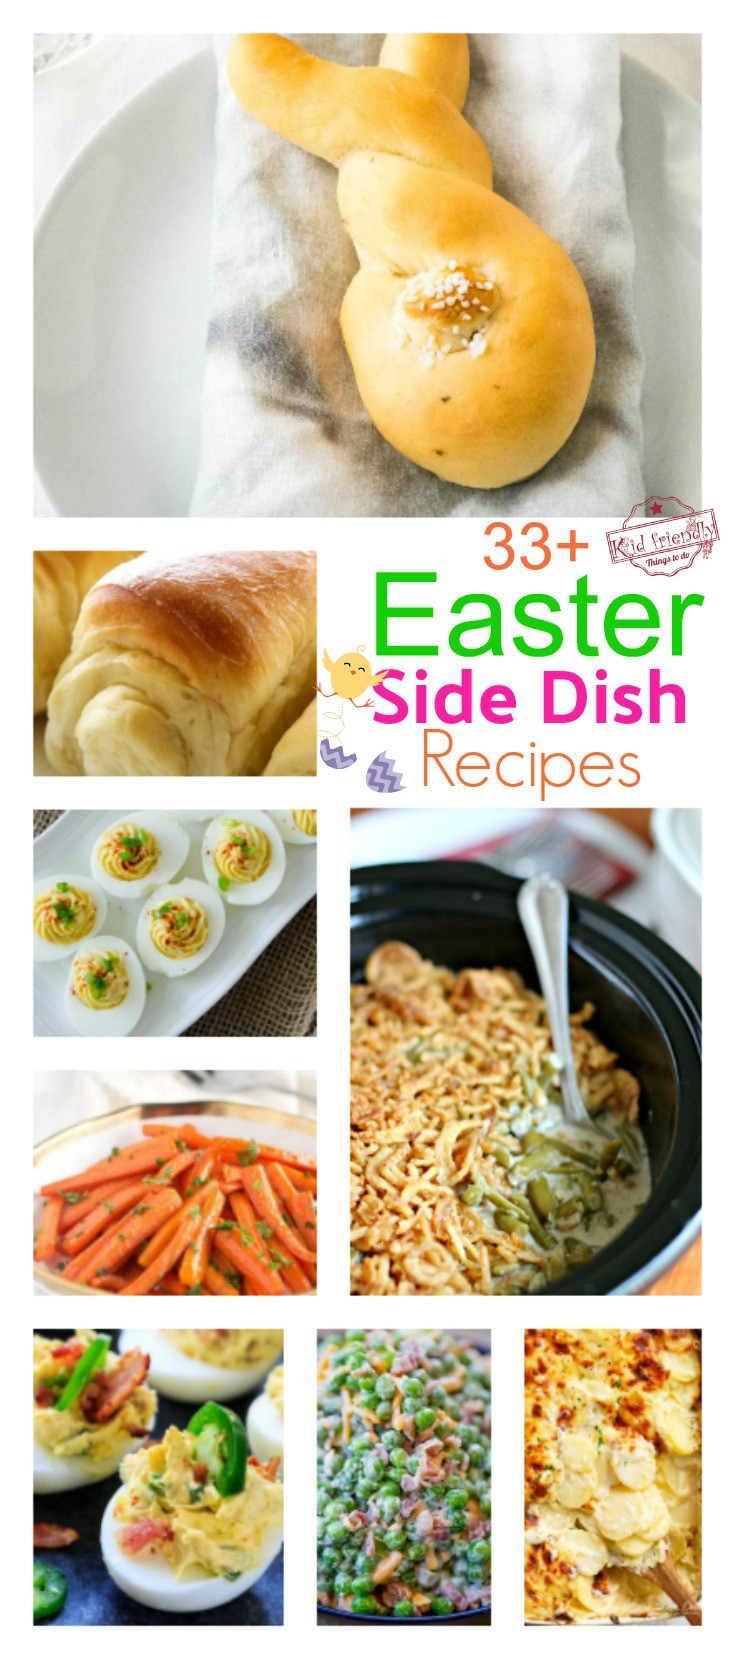 Side Dishes For Easter Dinner Ideas
 Over 33 Easter Side Dish Recipes for Your Celebration Dinner